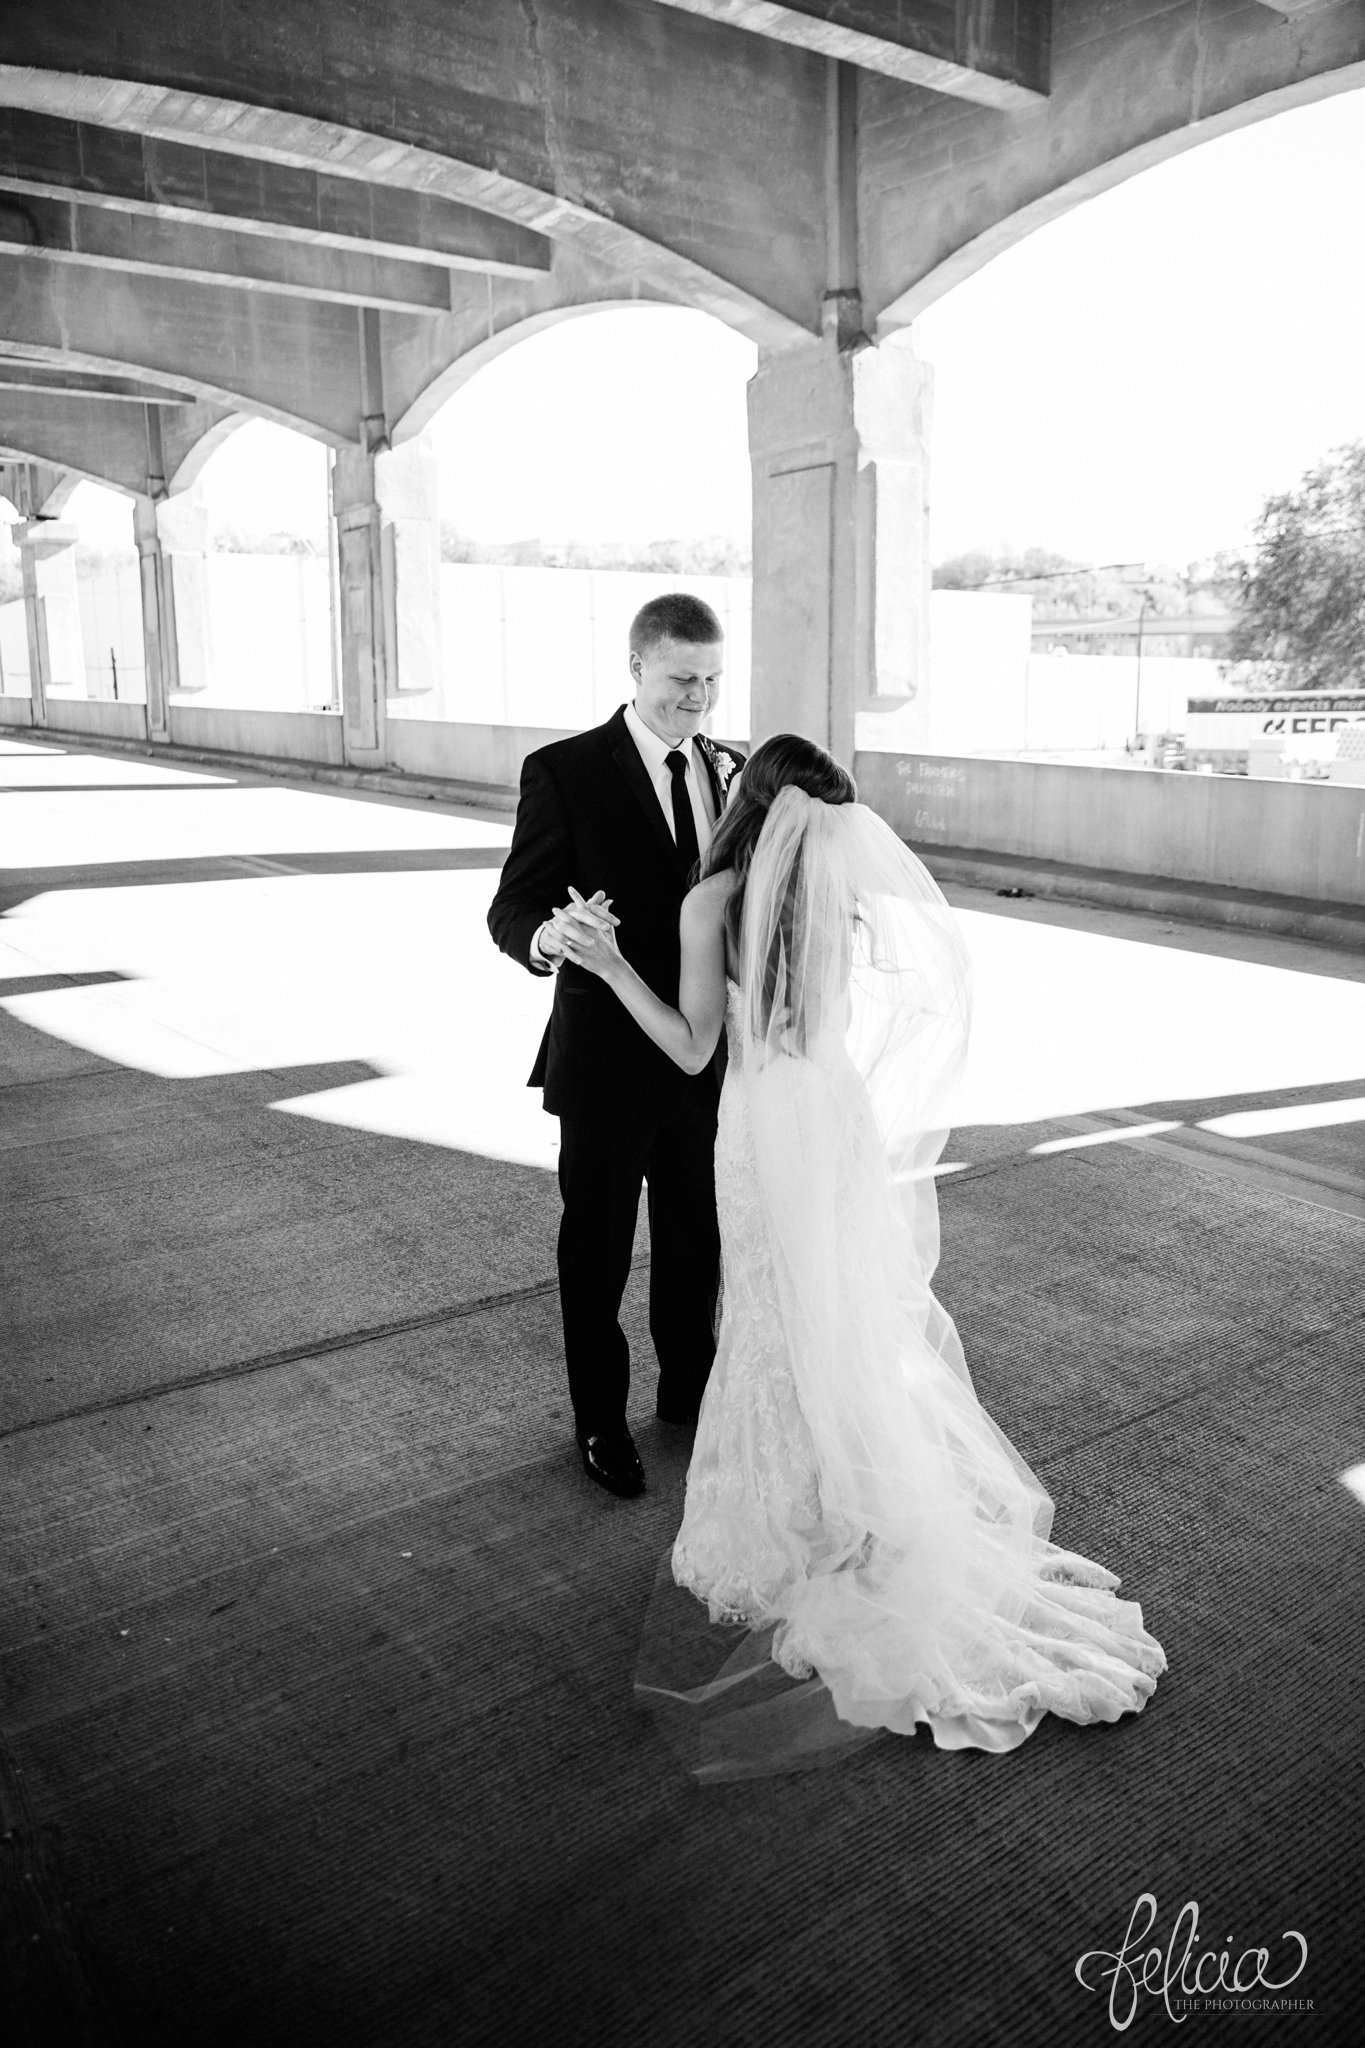 black and white | wedding | wedding photos | industrial | Rumely Event Space | wedding photography | images by feliciathephotographer.com | West Bottoms | first look | Maggie Sottero | bride and groom | industrial background | linking hands | candid